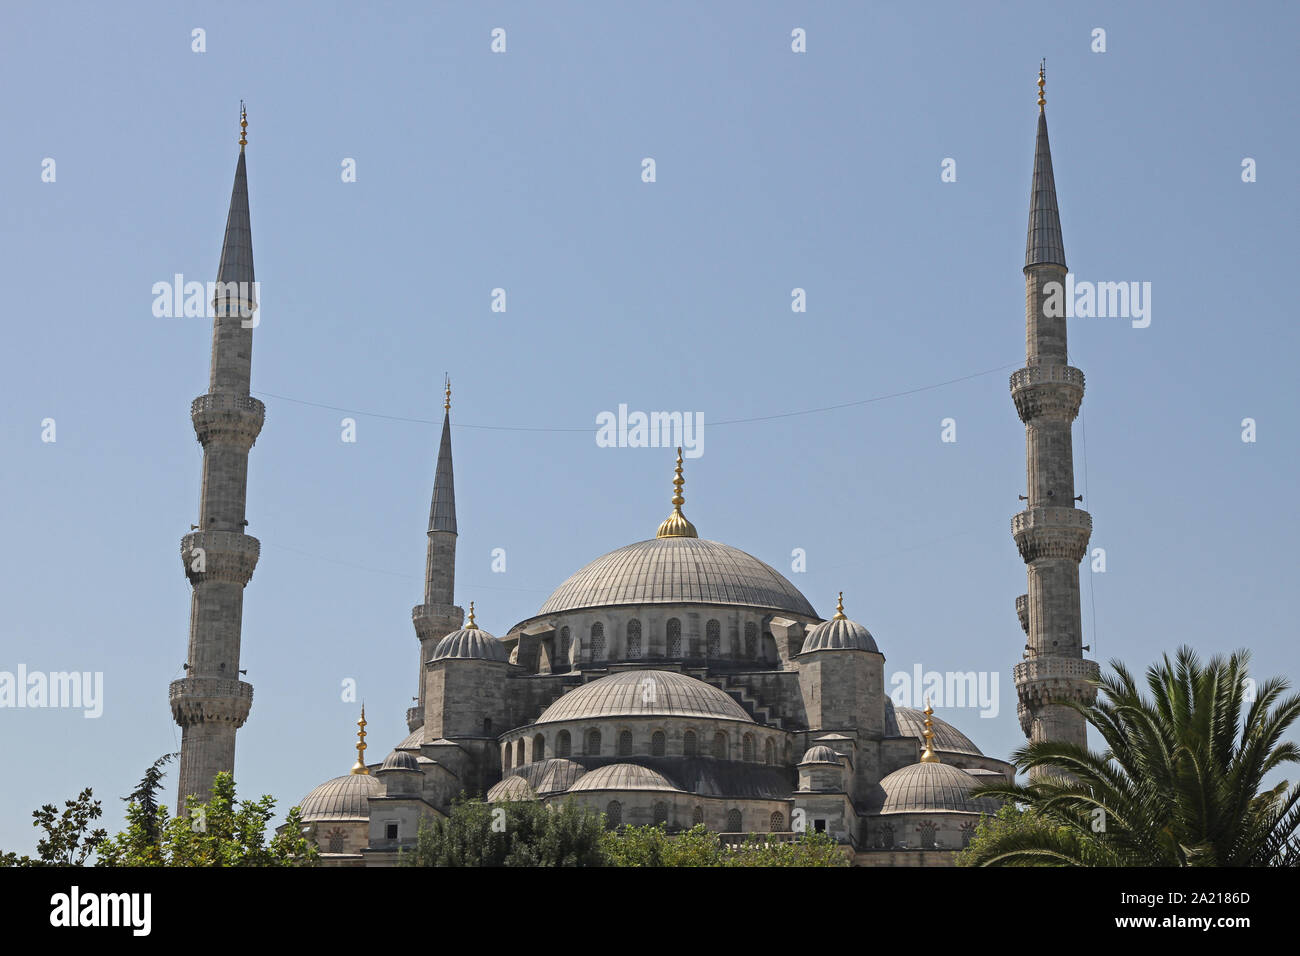 The Sultan Ahmed Mosque AKA Blue Mosque, Fatih, Istanbul, Turkey. Stock Photo